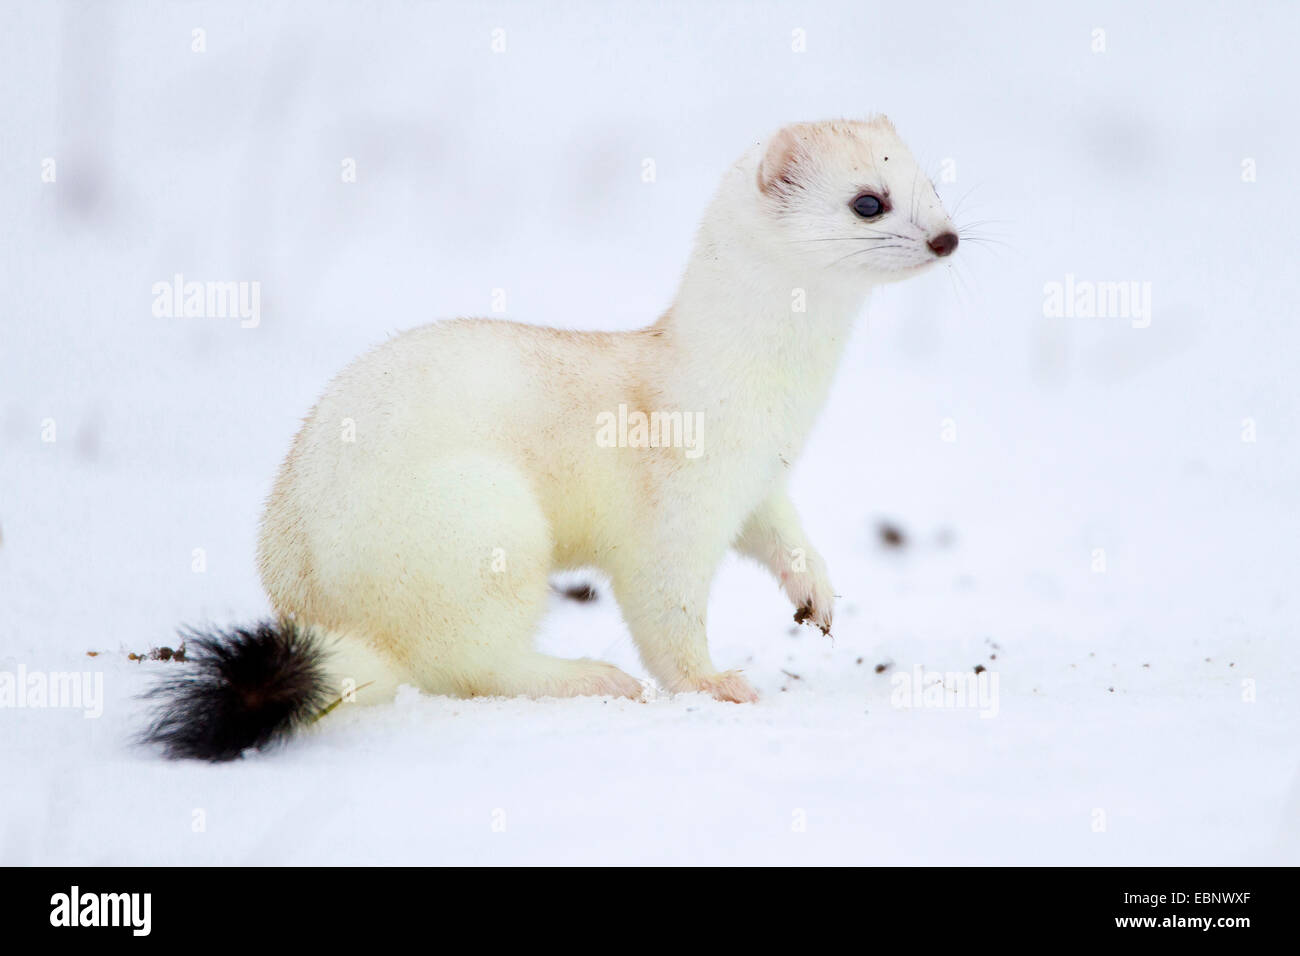 Ermine, Stoat, Short-tailed weasel (Mustela erminea), with winter coat in snow, Germany Stock Photo